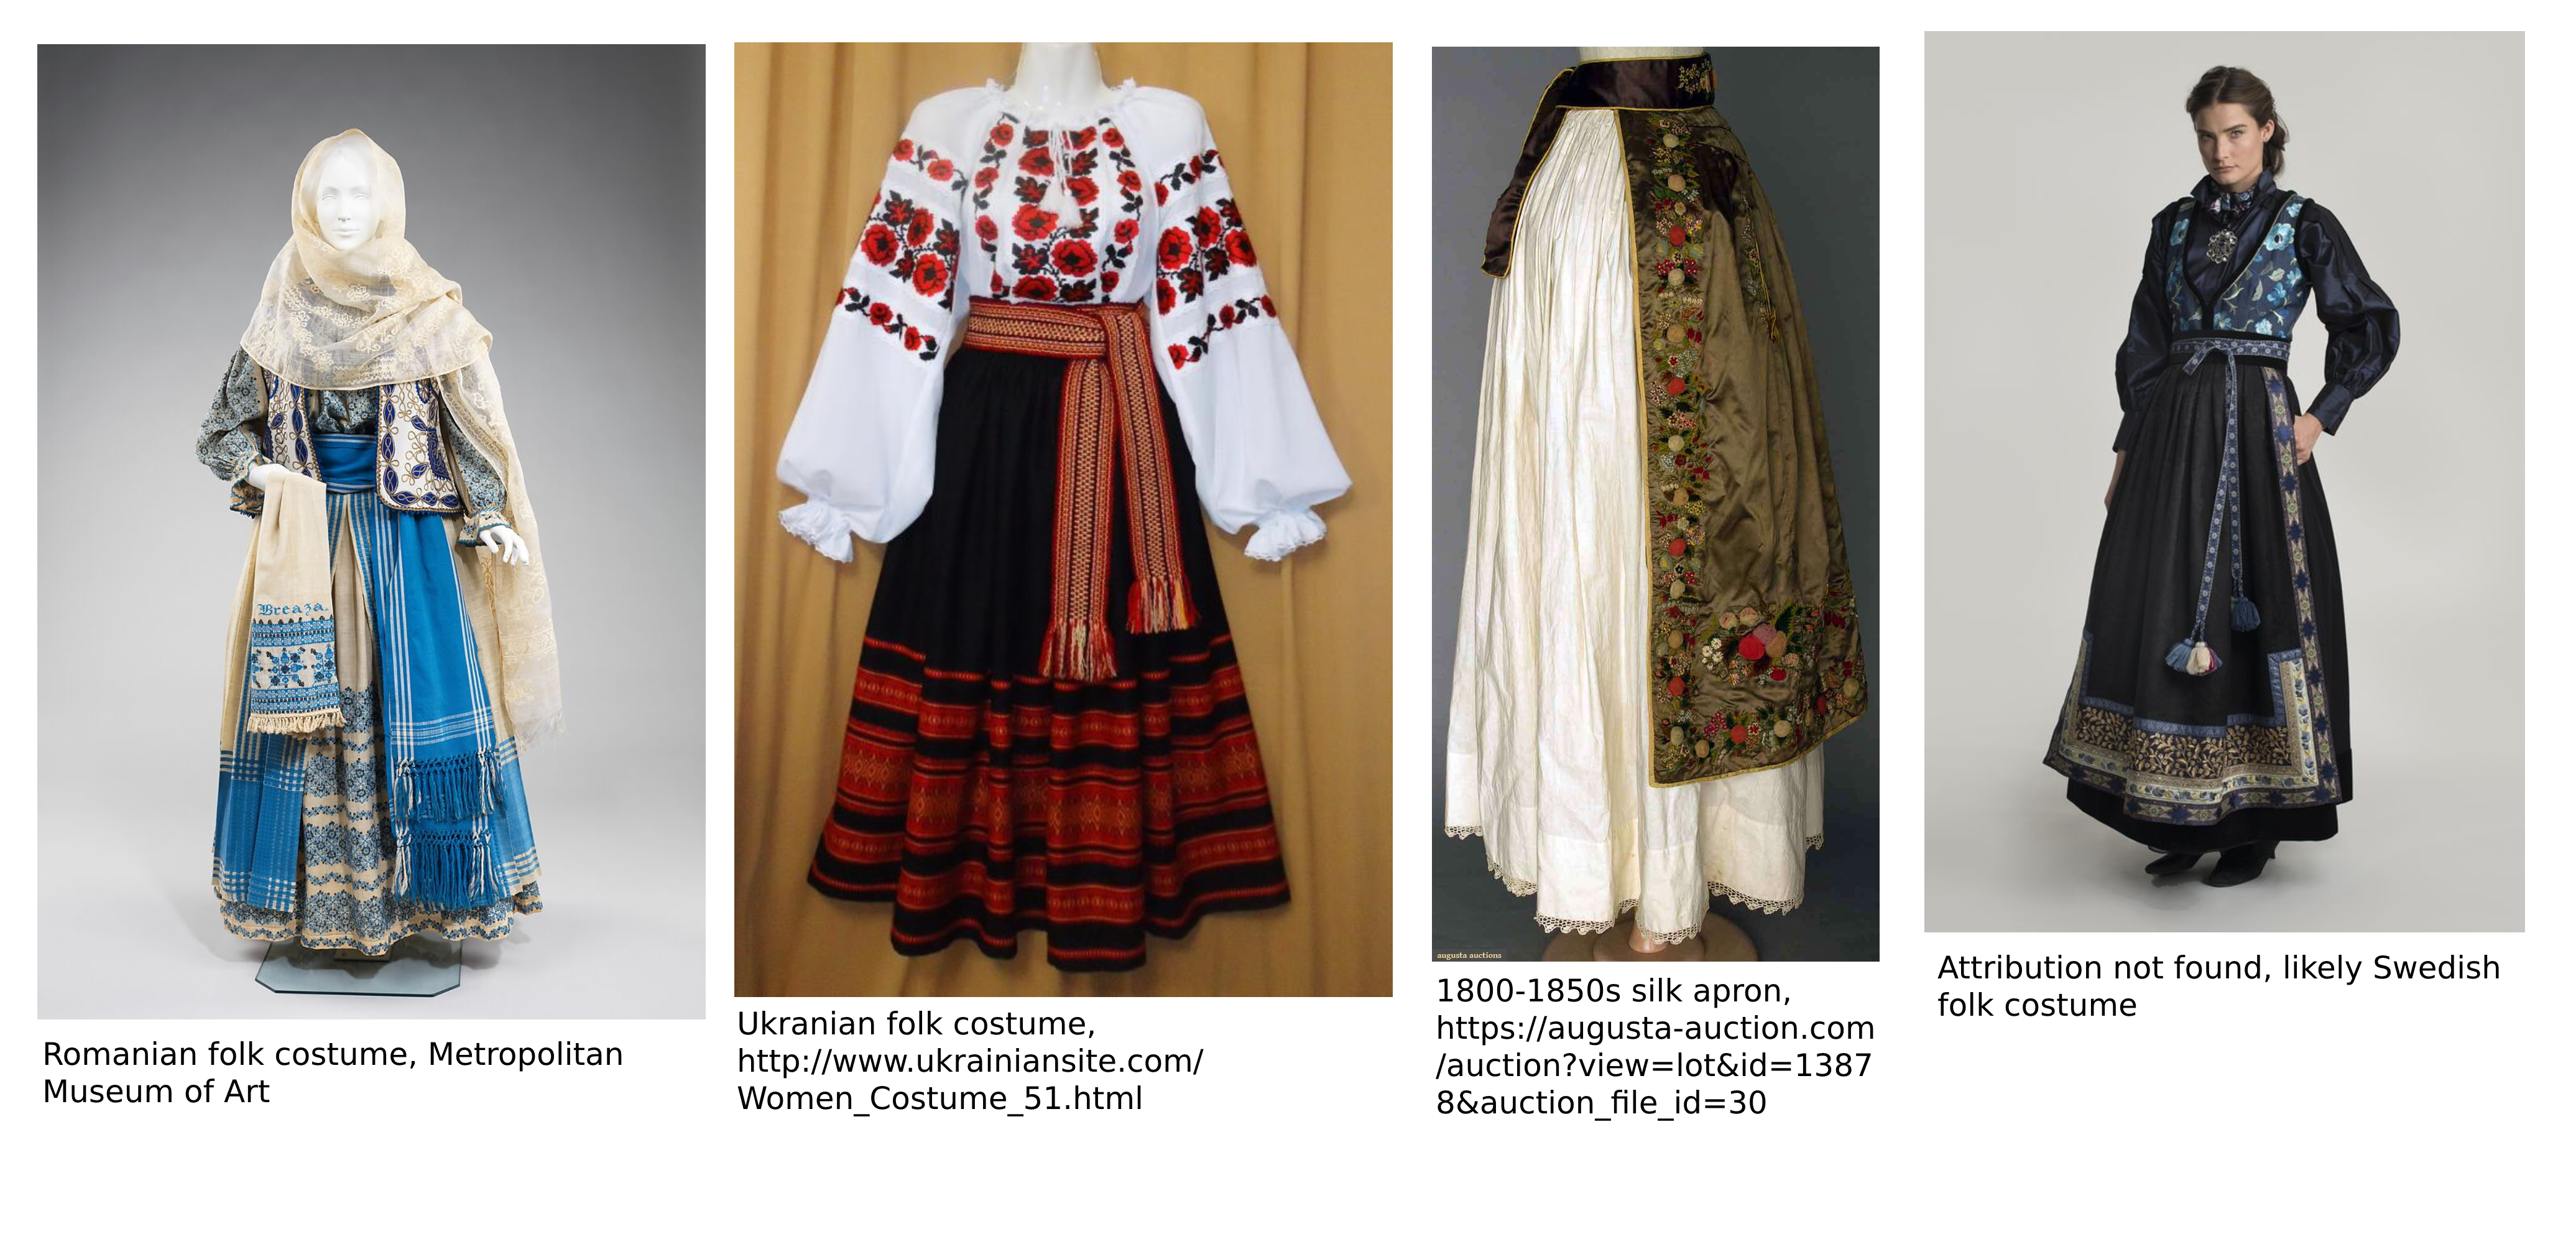 A moodboard for Euterpe's character design, featuring skirts with embroidered aprons, and Swedish, Ukranian and Romanian folk dress with prominent embroidered patterns.